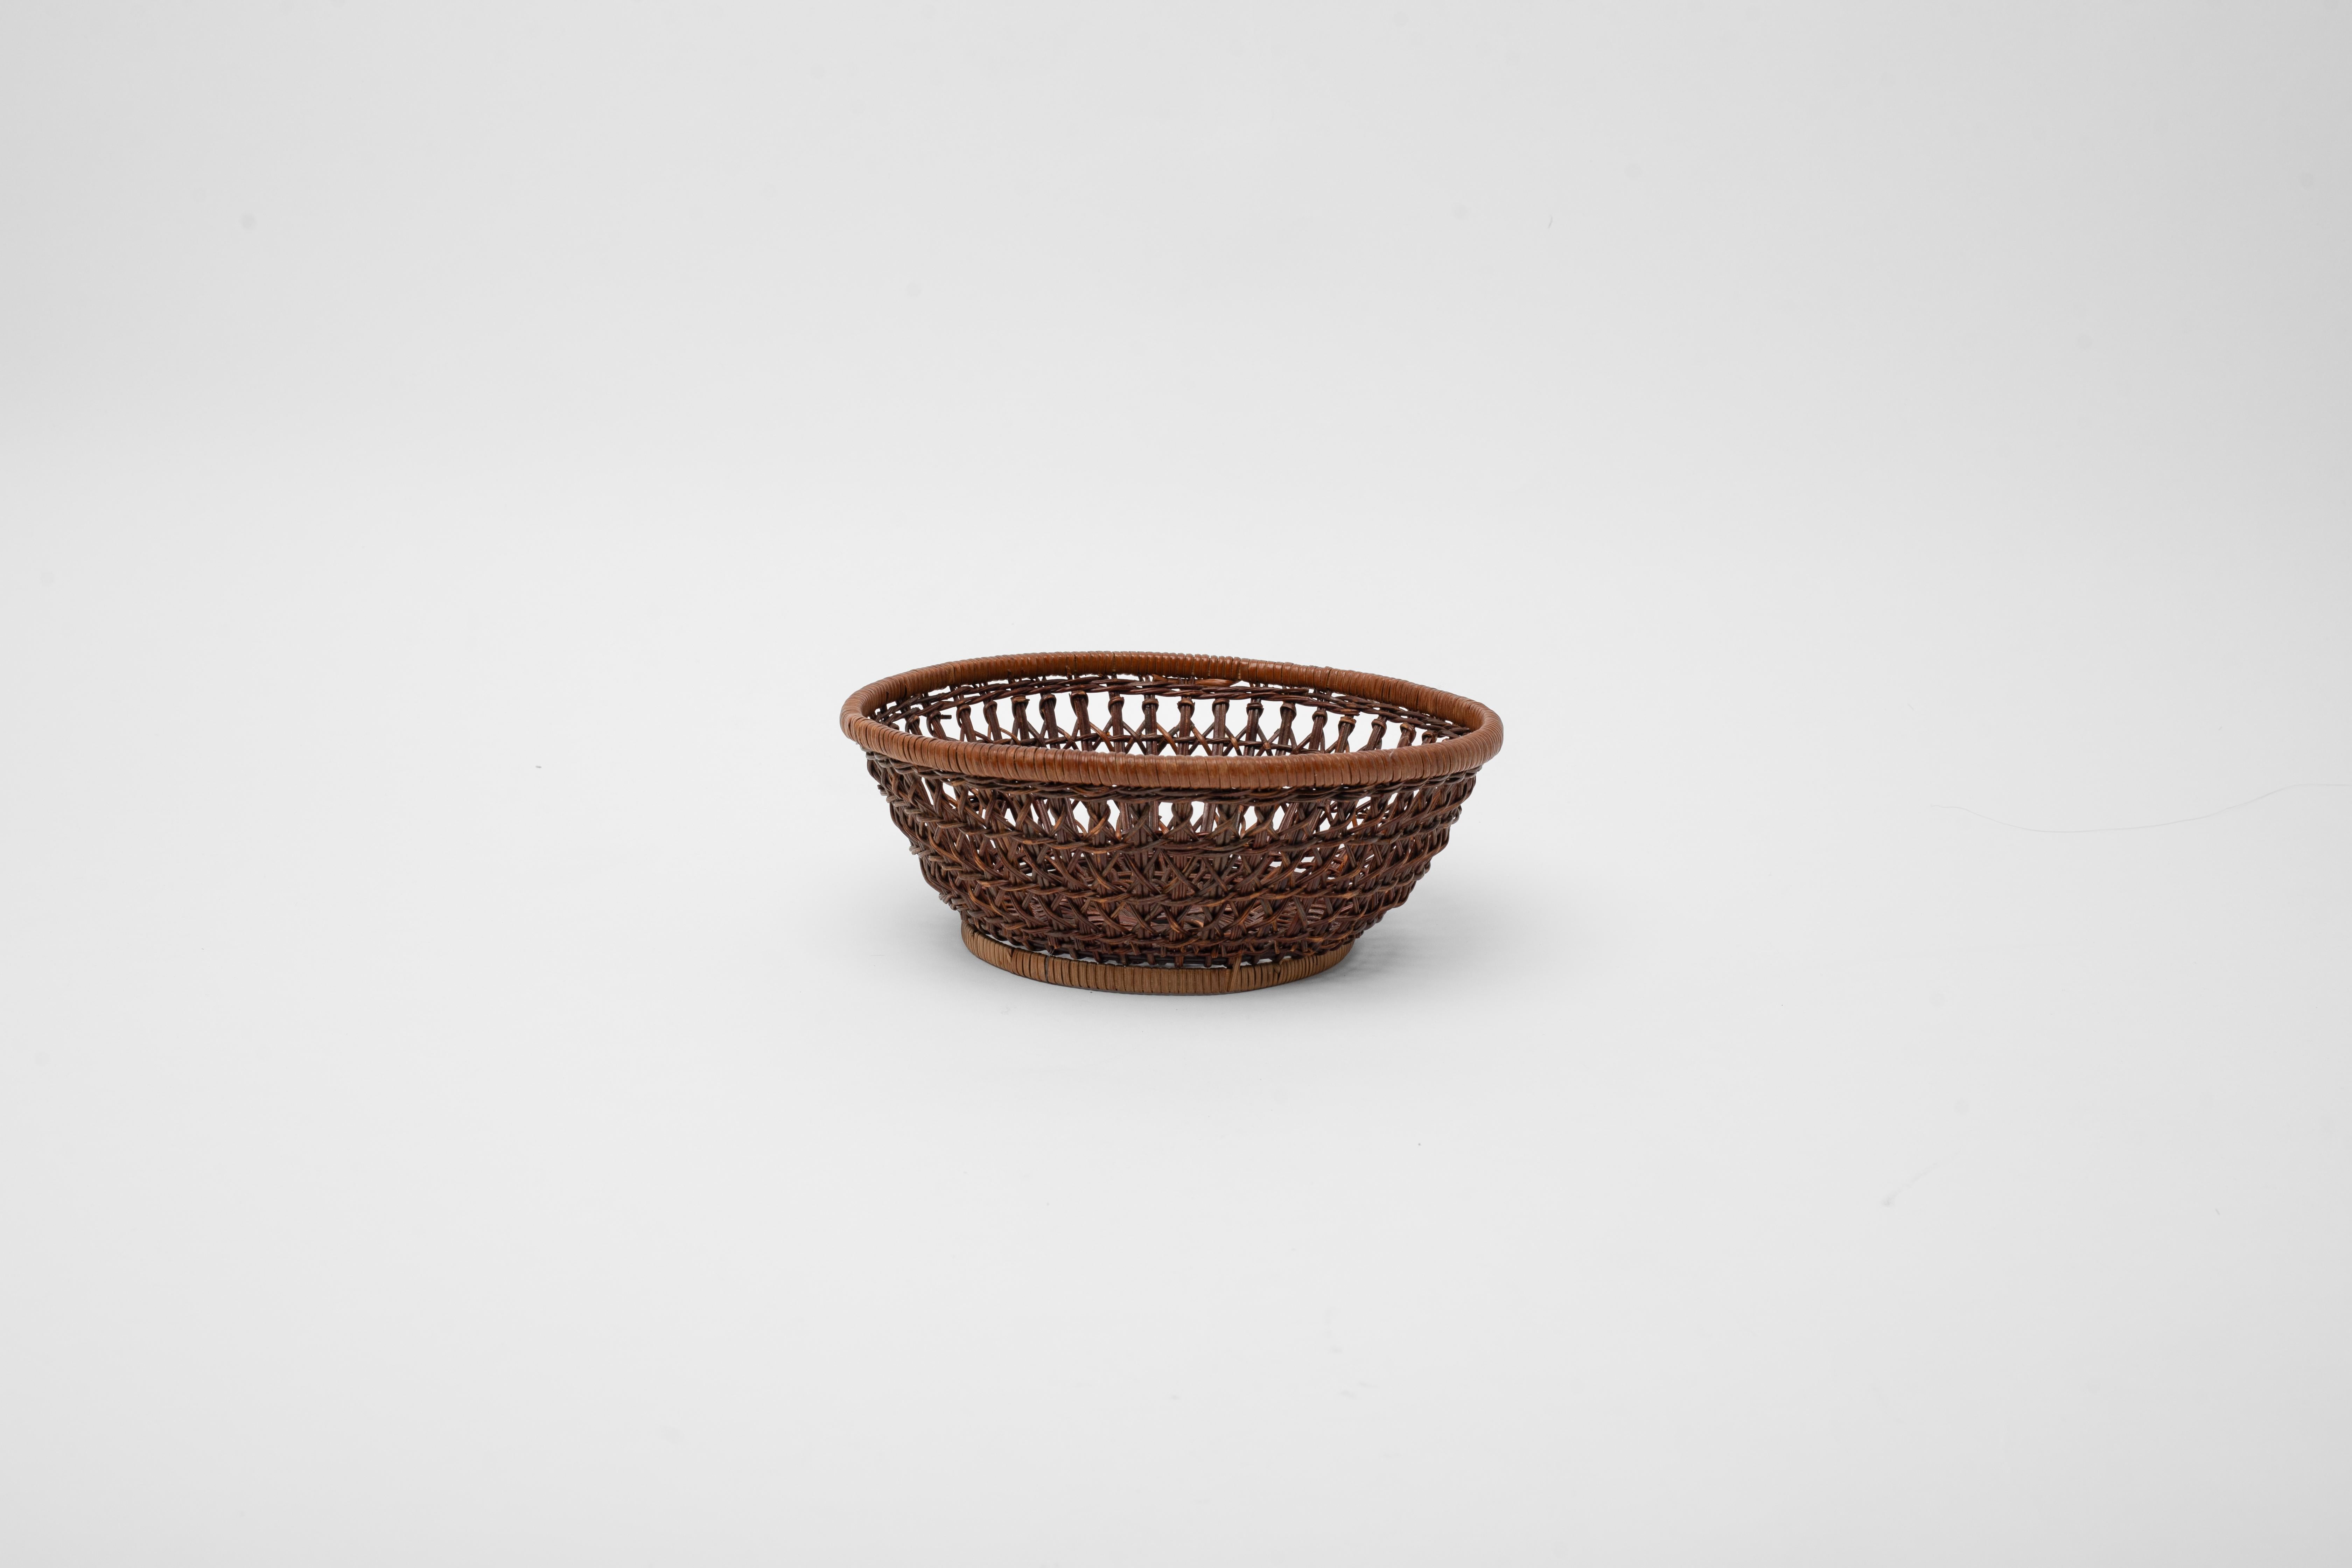 Unique piece from Japan

Beautifully handcrafted bamboo basket with intricate weaving technique and lovely shape. Simple and elegant. A handmade quality piece - built for function, designed for pleasure.

Wonderful condition - would make an